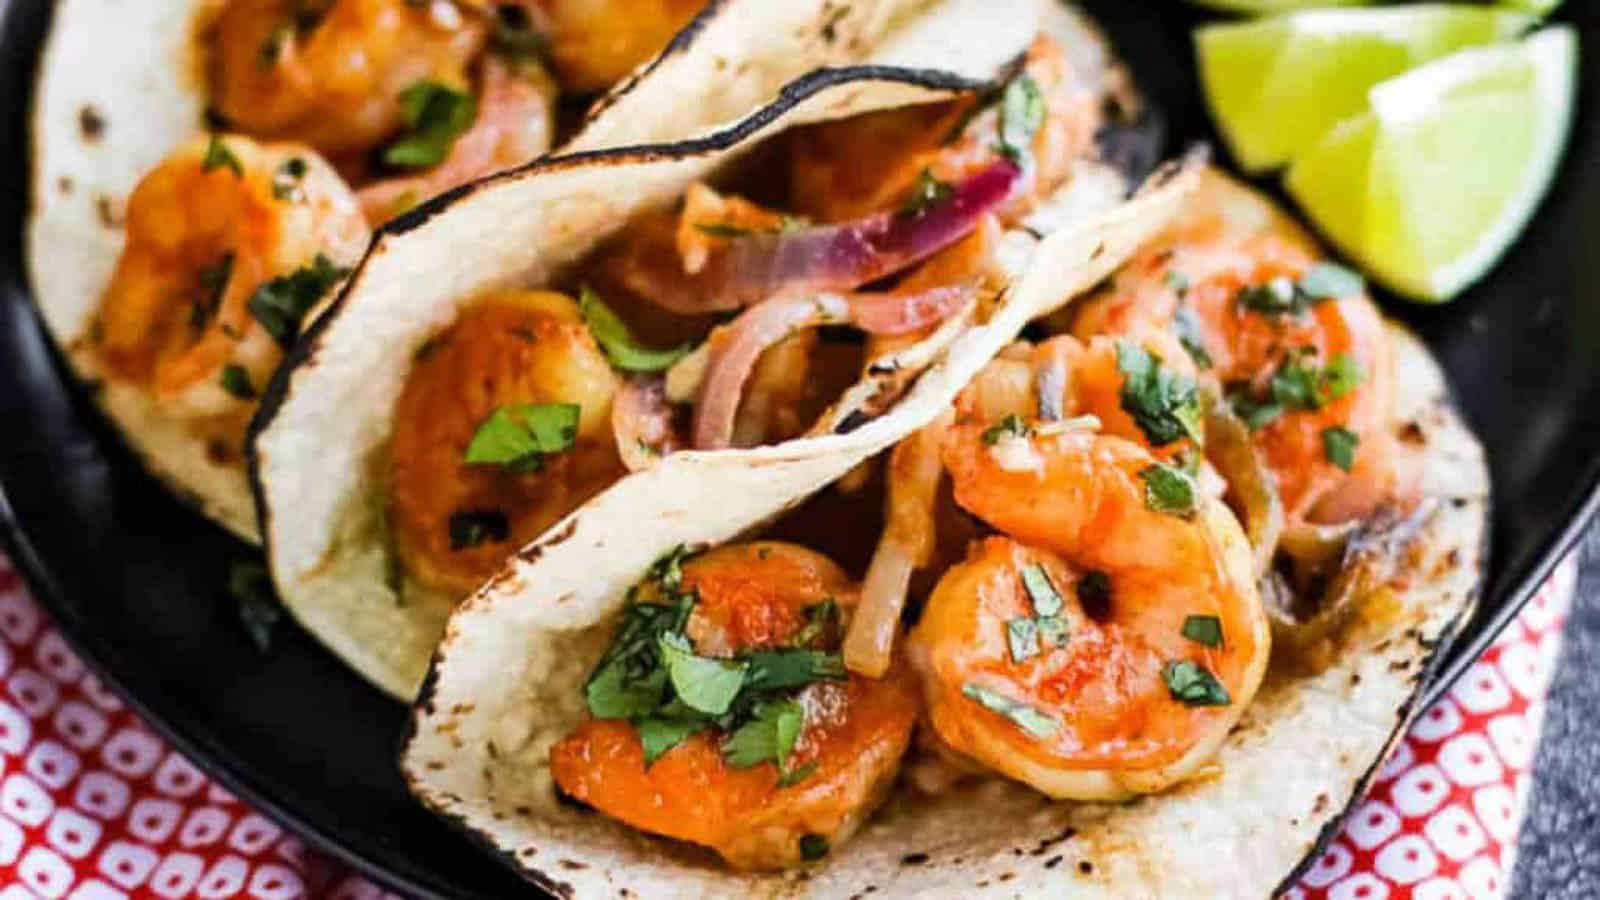 Shrimp stuffed into soft corn tortillas with lime wedges on the side.